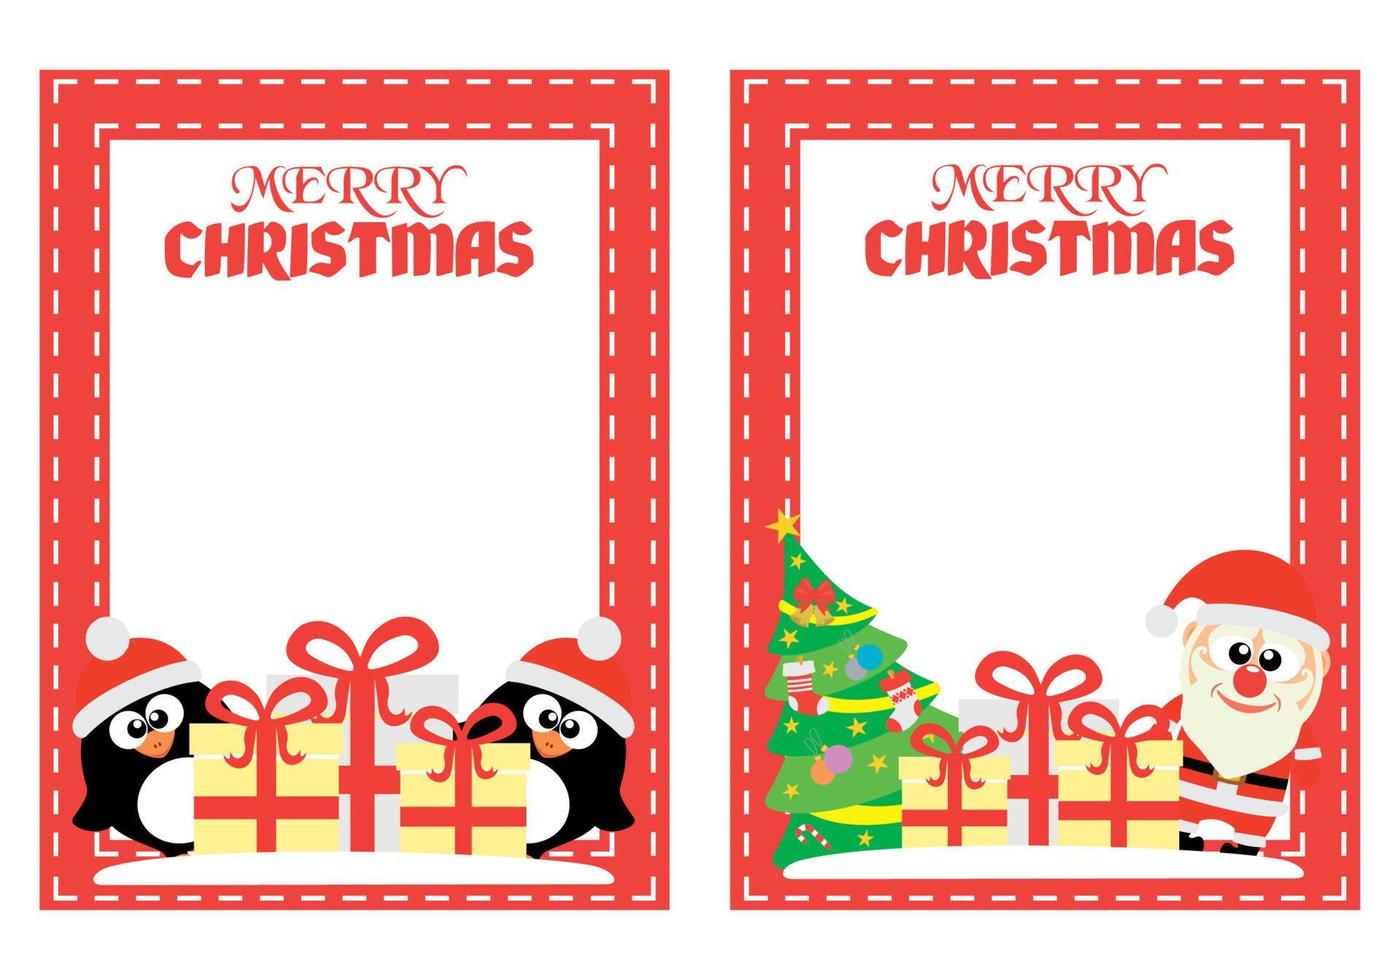 Merry Christmas background set vector